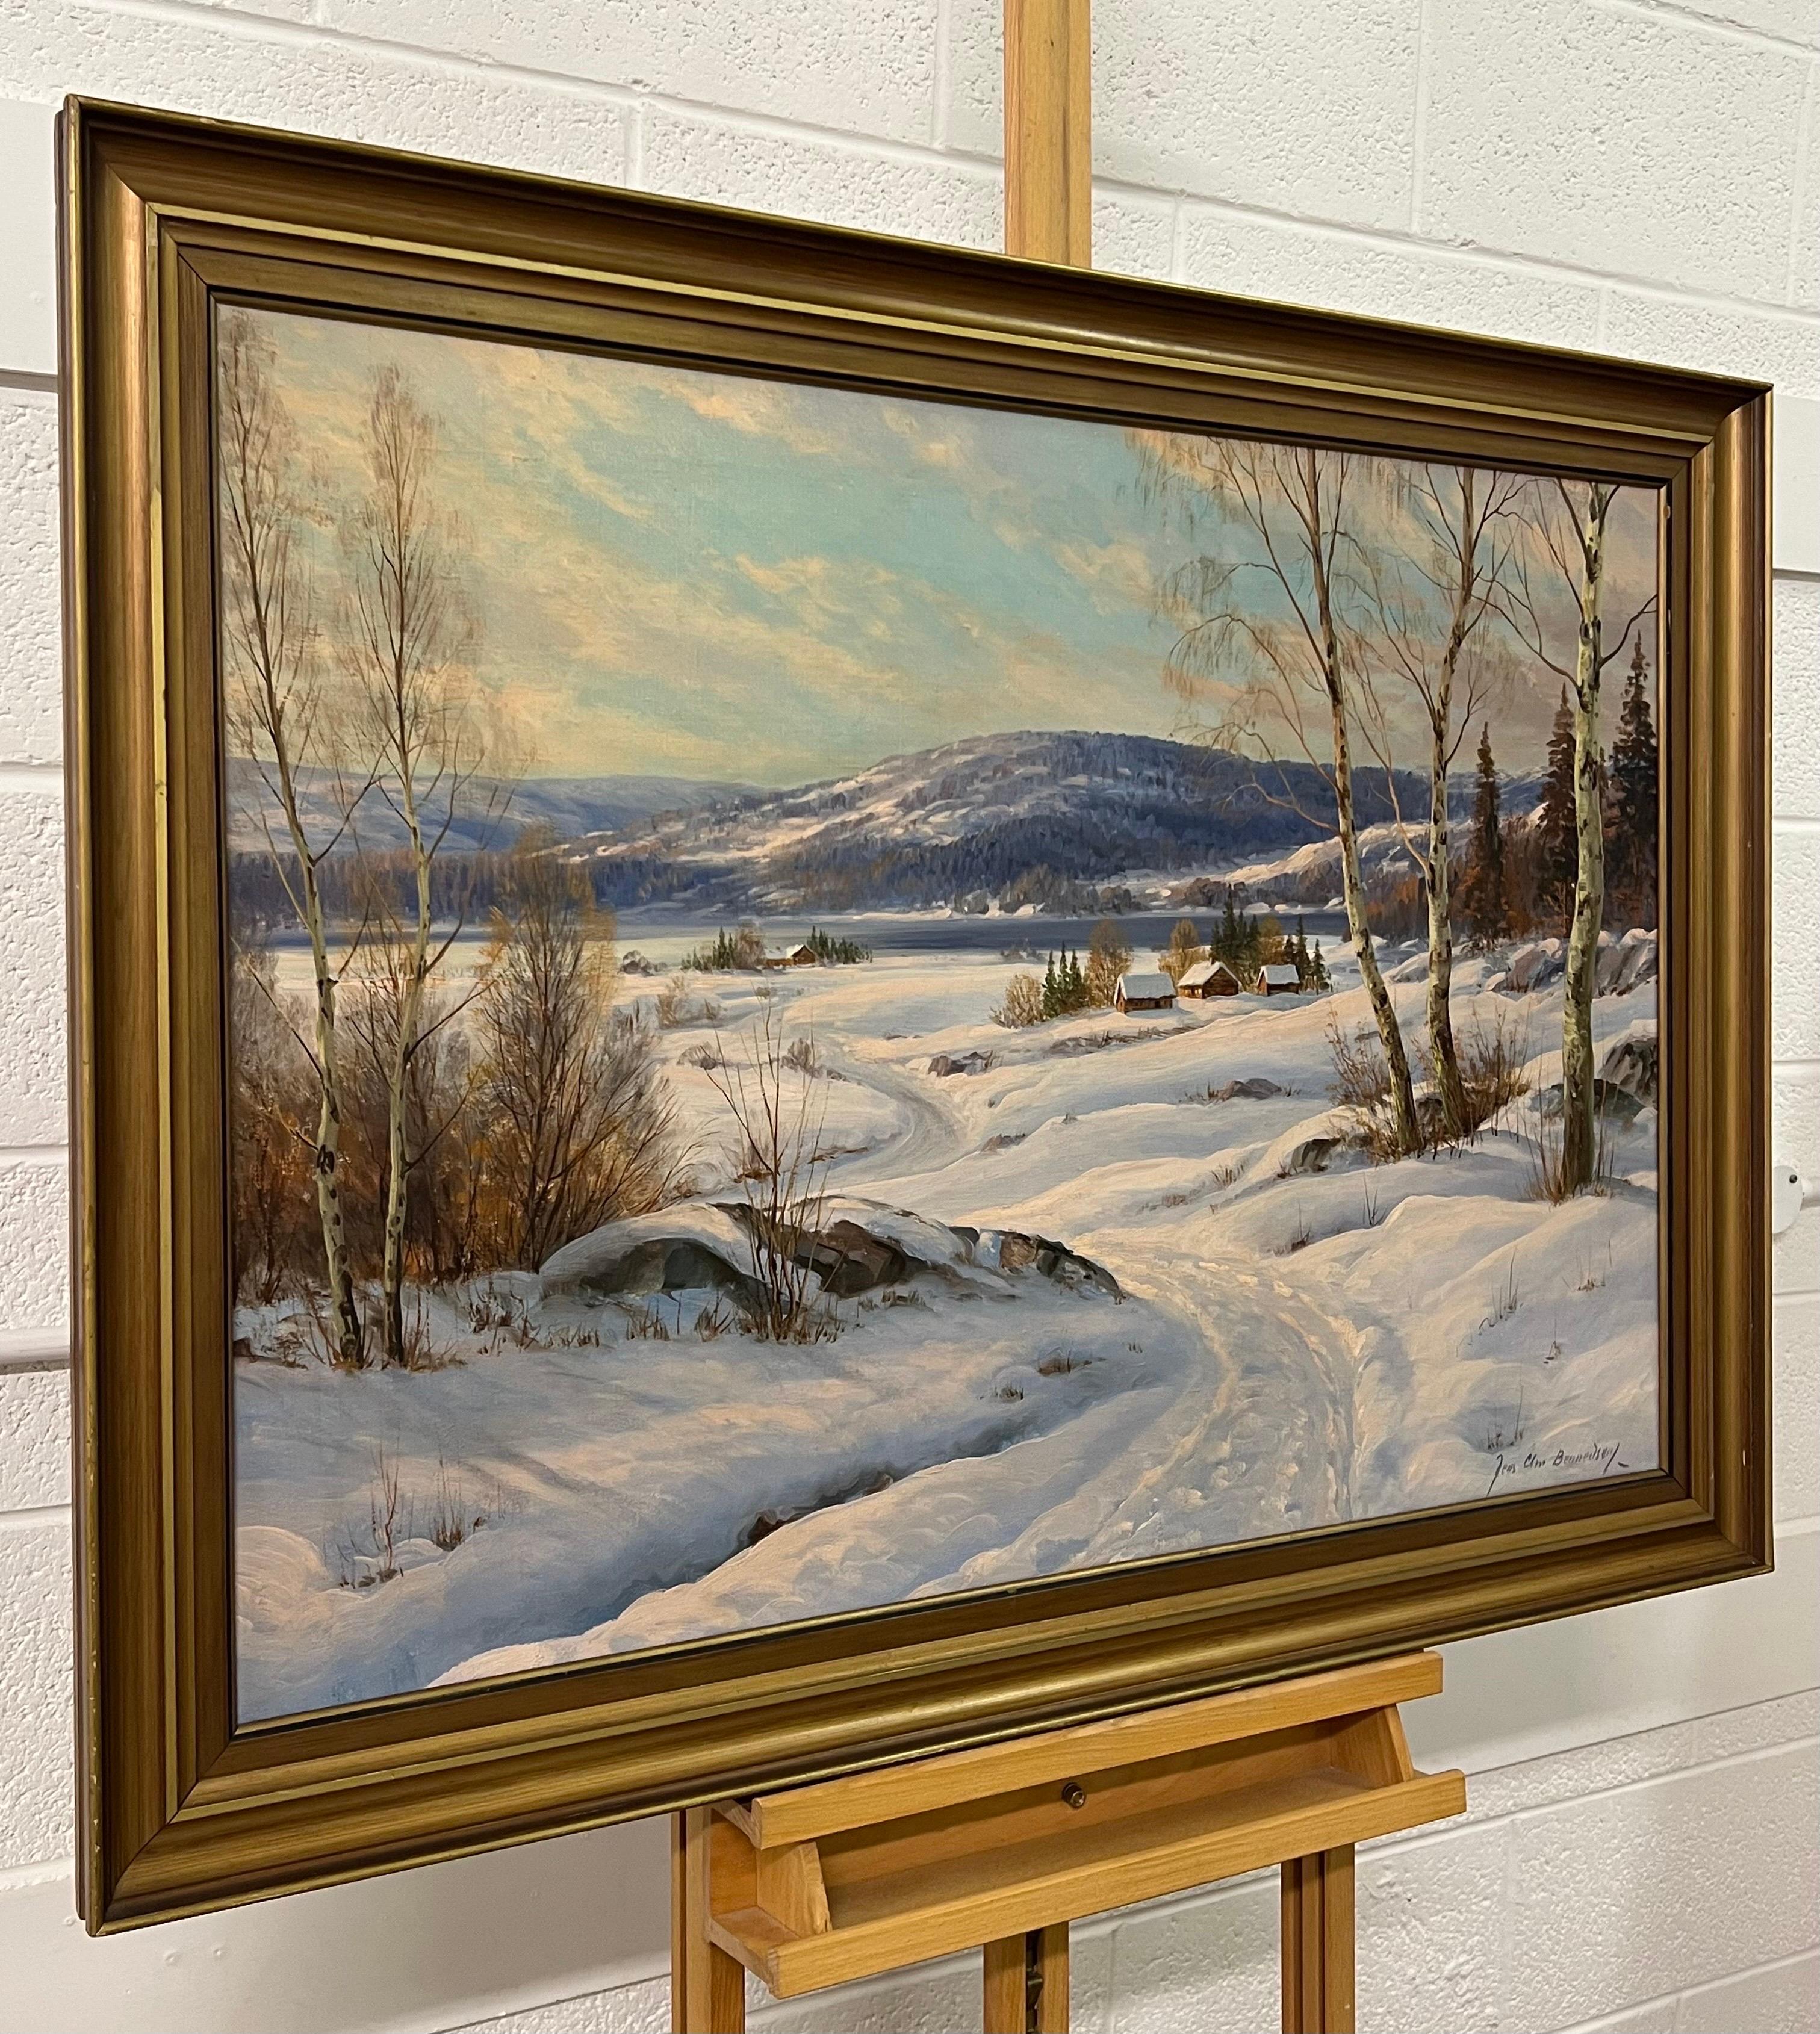 Swedish Hamlet in a Snowy Winter Landscape with Birch Trees by Danish Artist - Painting by Jens Christian Bennedsen